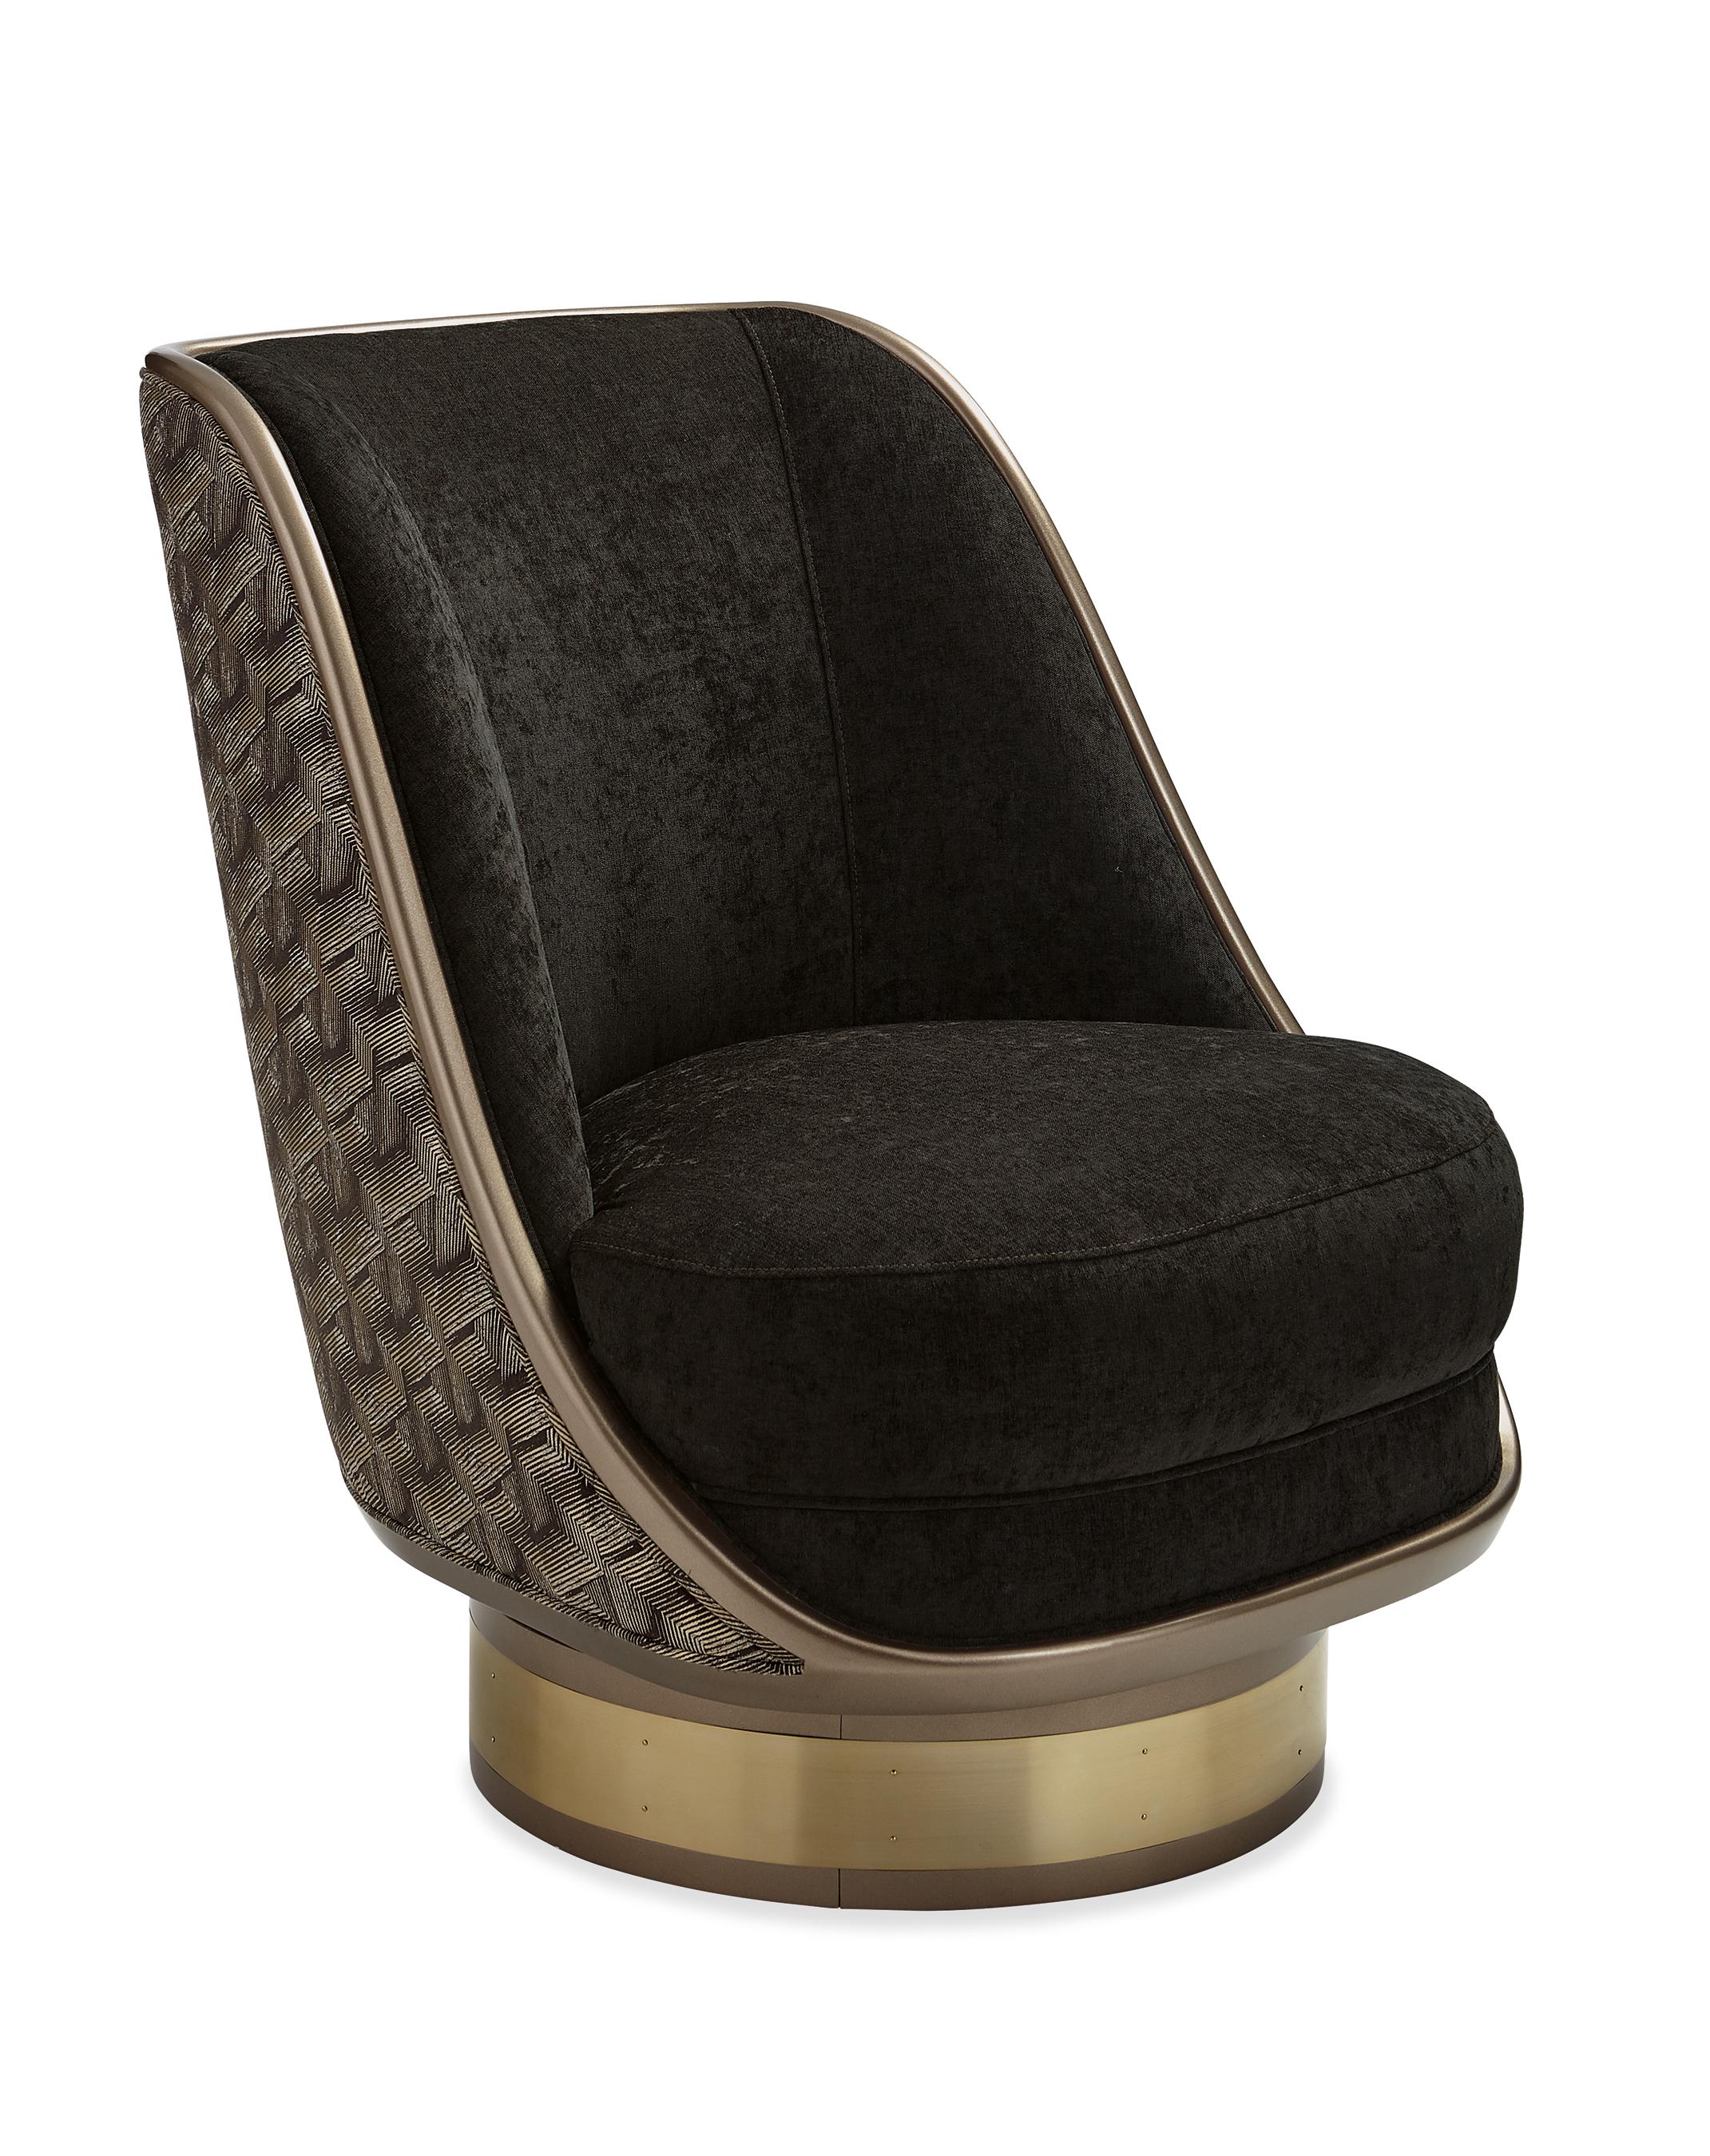 Contemporary Accent Chair GO FOR A SPIN UPH-018-035-A in Espresso, Gold Fabric